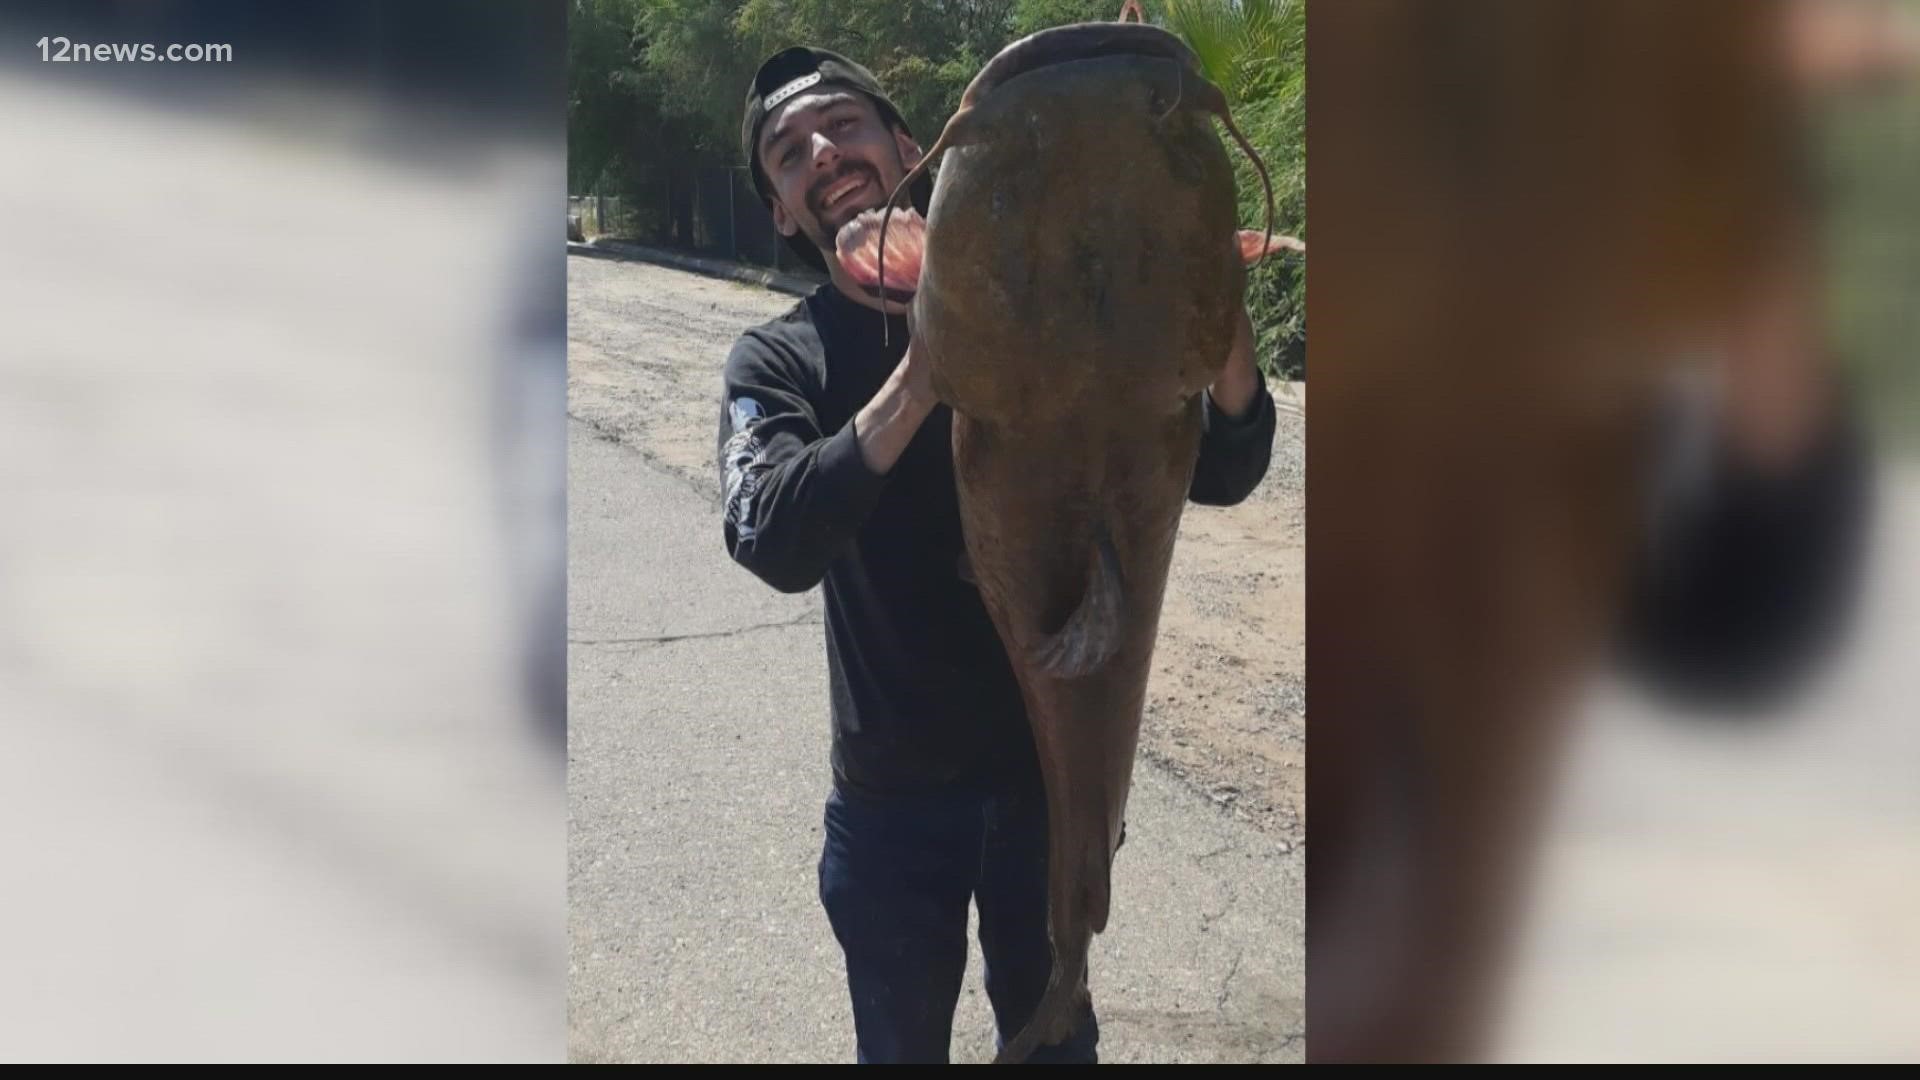 A Valley man battled a 40-pound catfish and lived to tell the tale, but it's not just what Trino Diaz caught that makes his story so special.